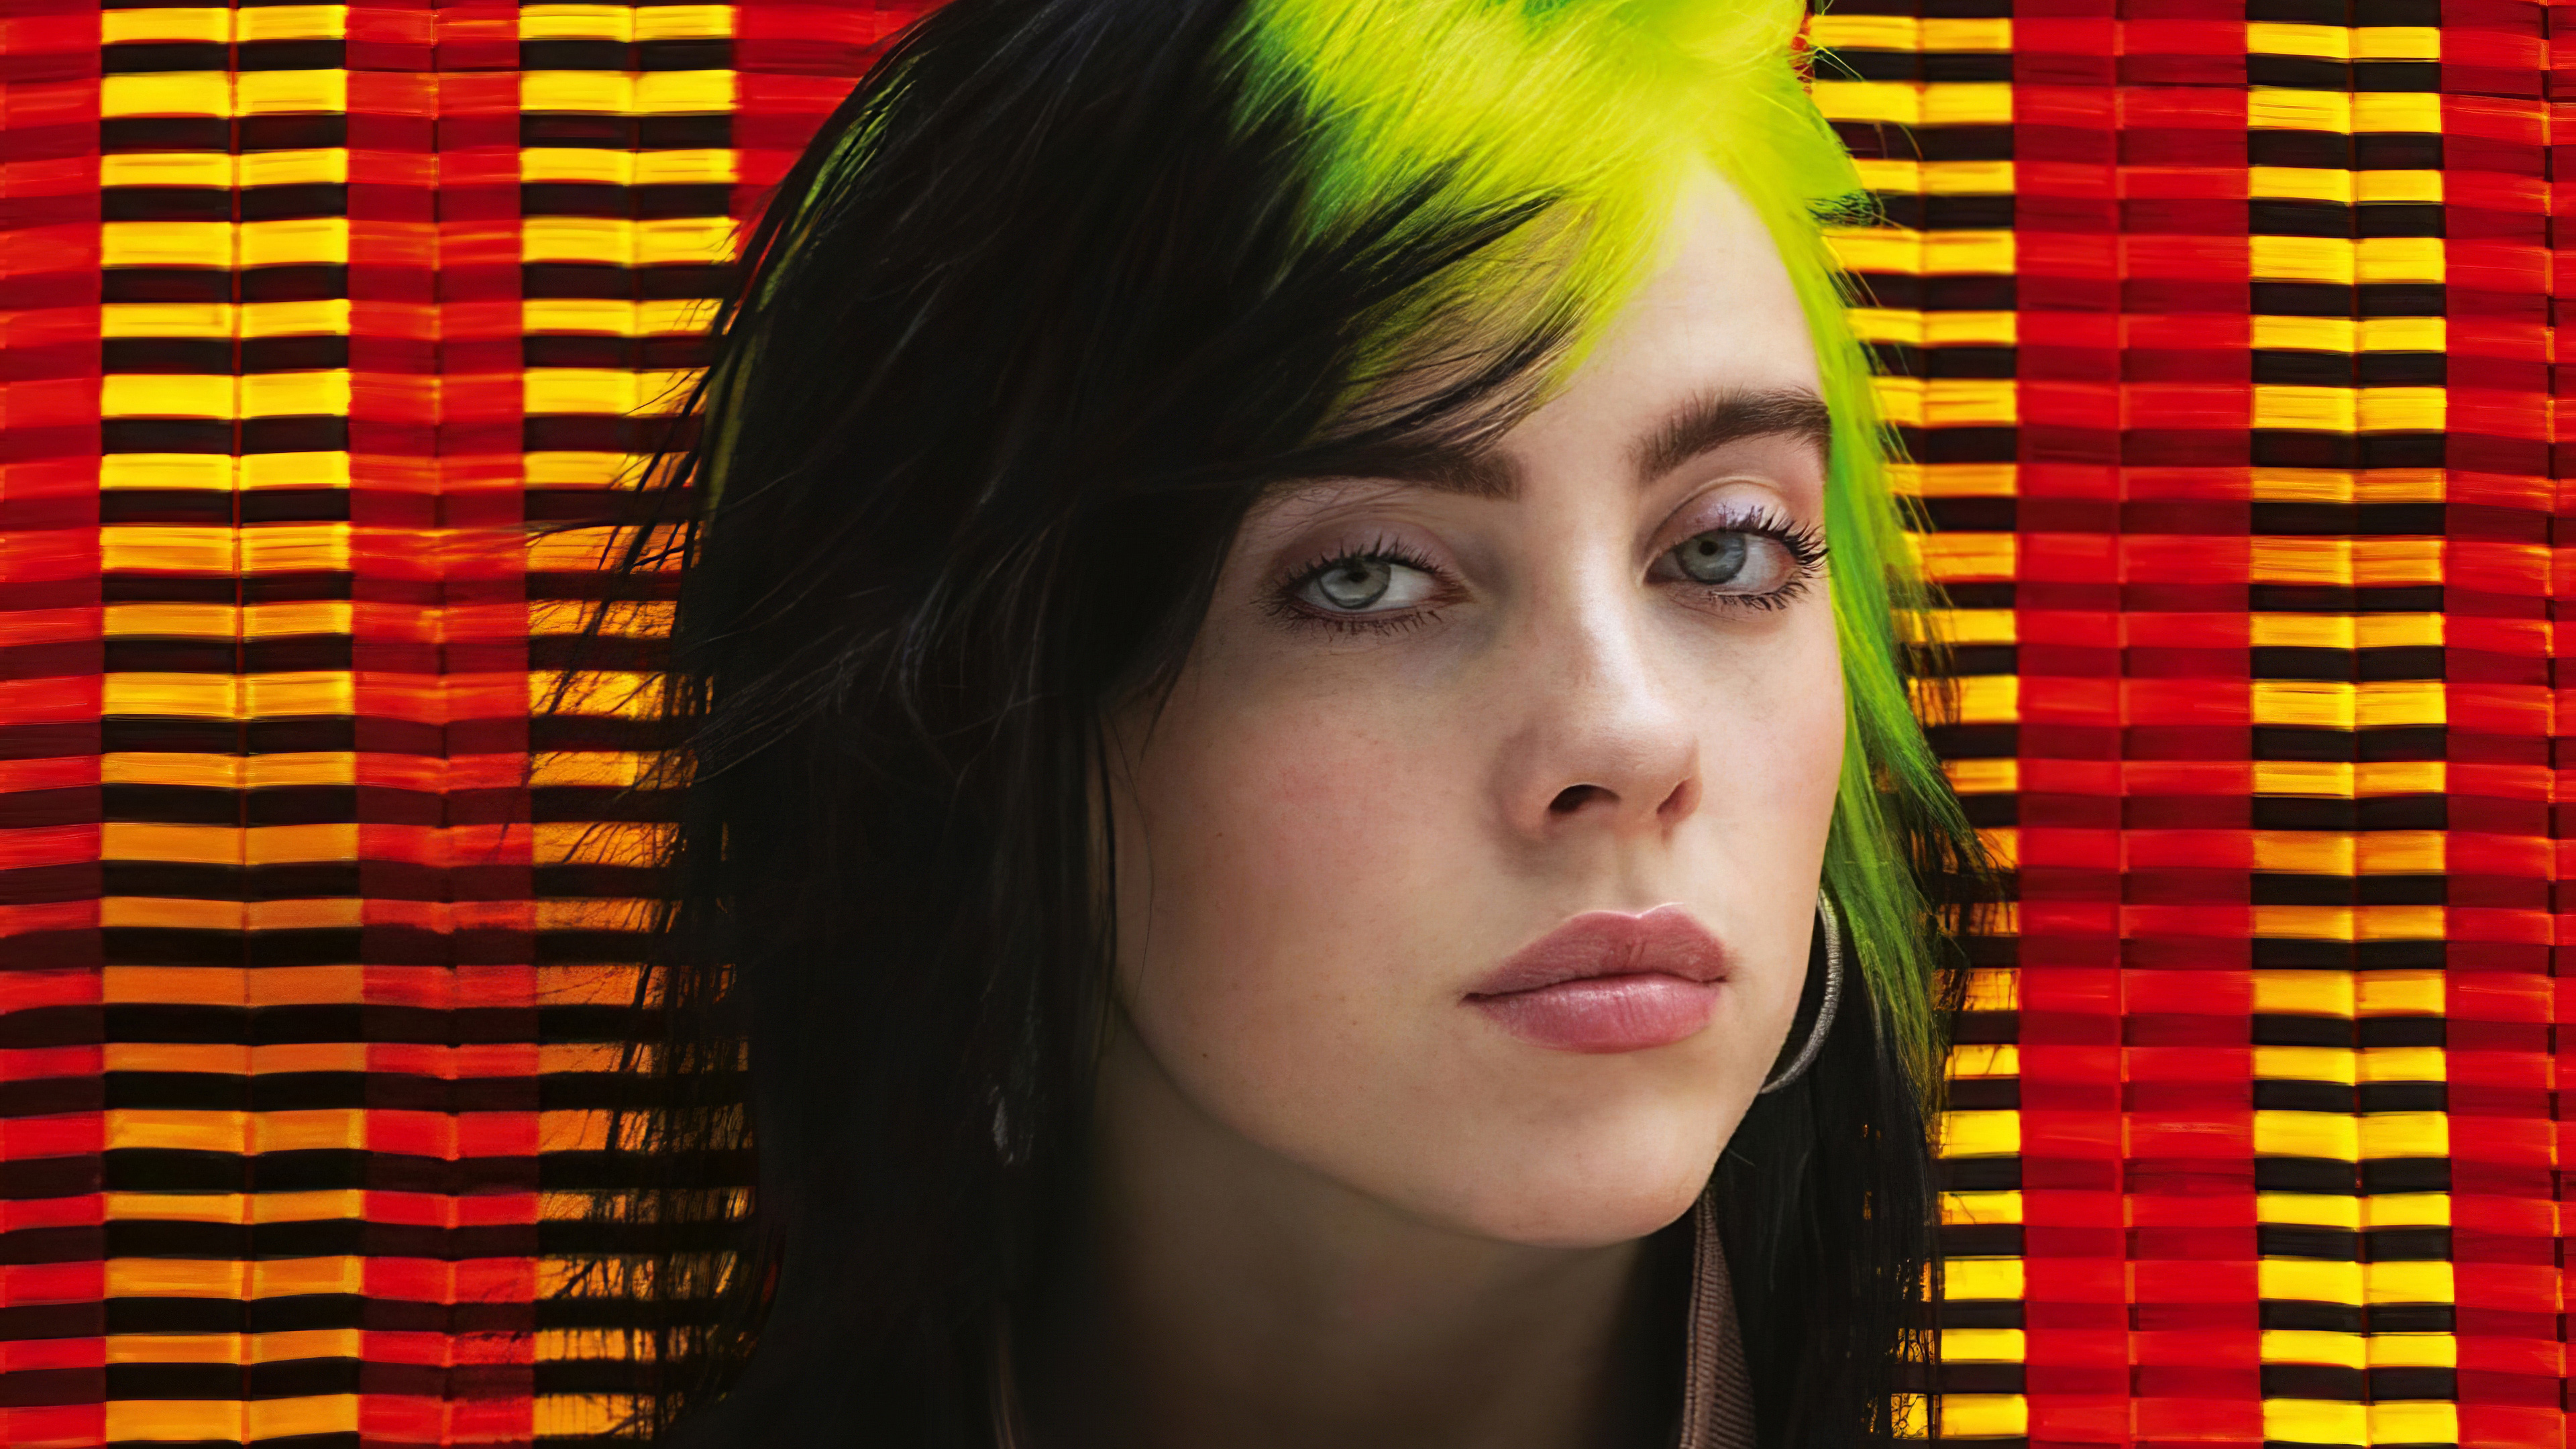 Billie Eilish With Ash Eyes And Green Hair In Red And Yellow Strips Wallpaper Looking Cute K HD